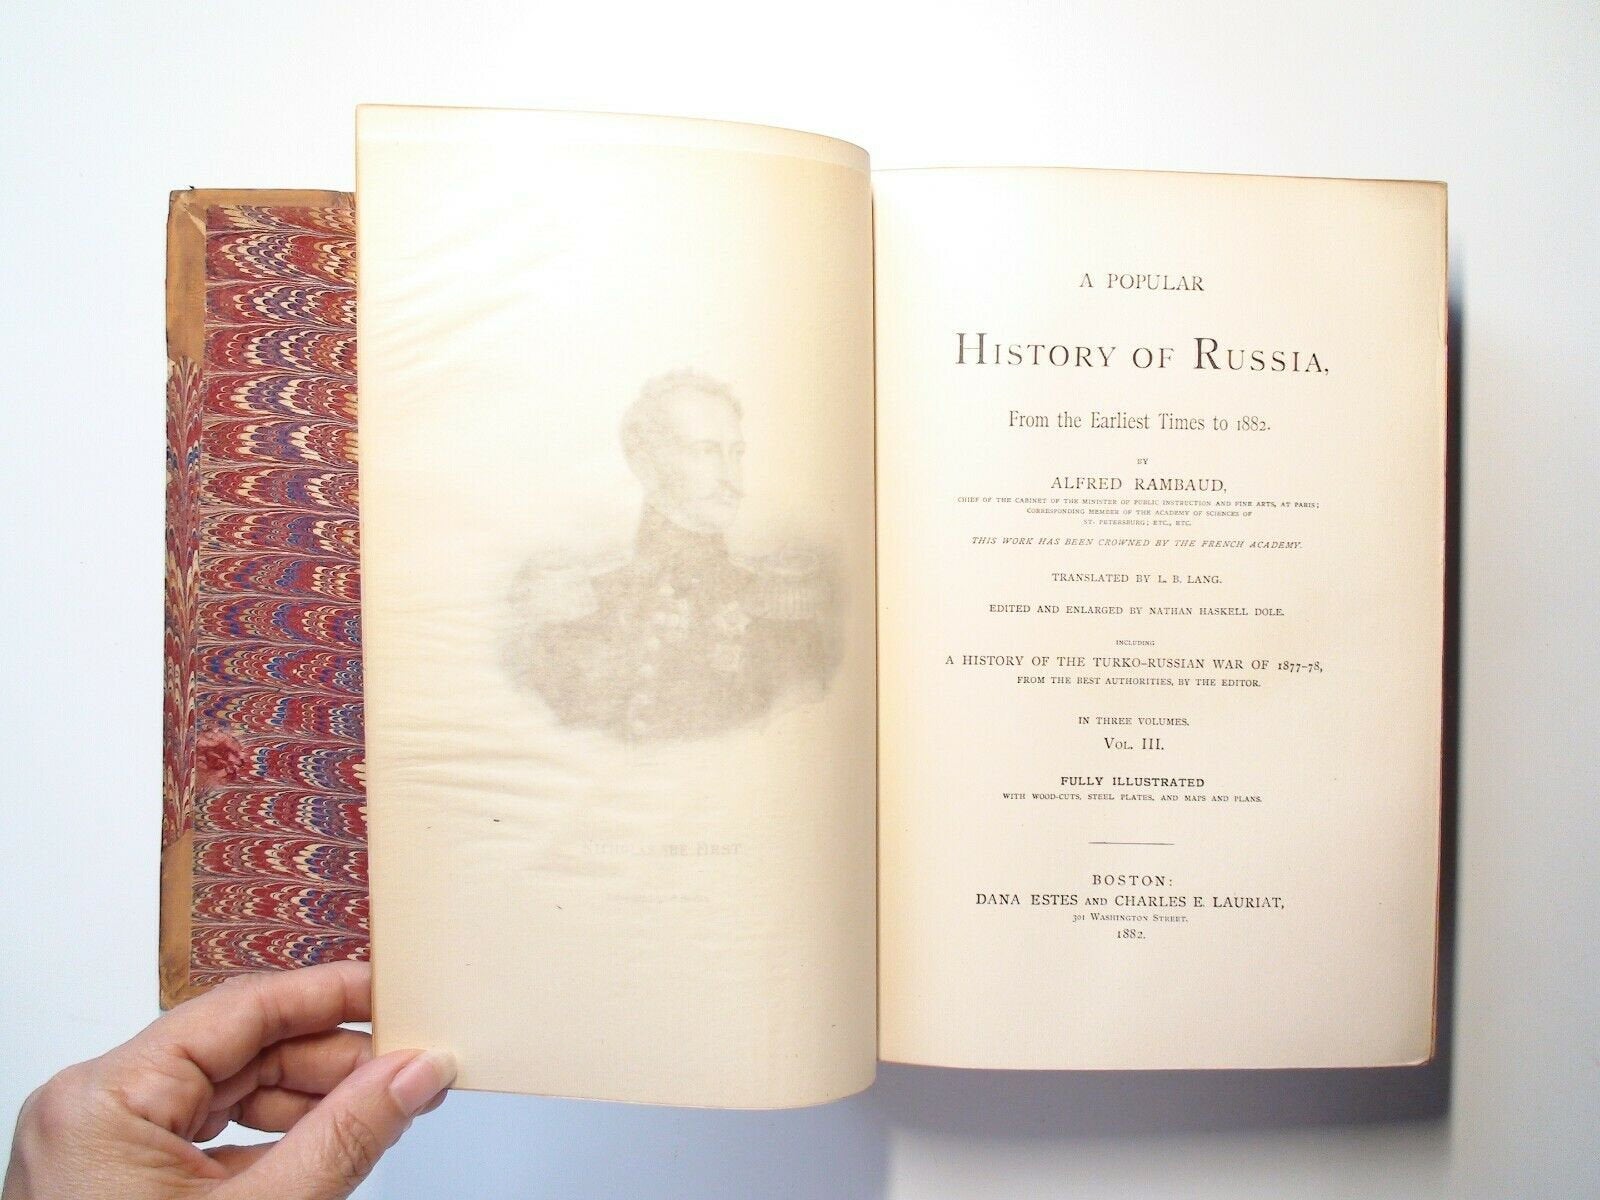 A Popular History of Russia, Alfred Rambaud, 2 Vols, Illustrated, Leather, 1880